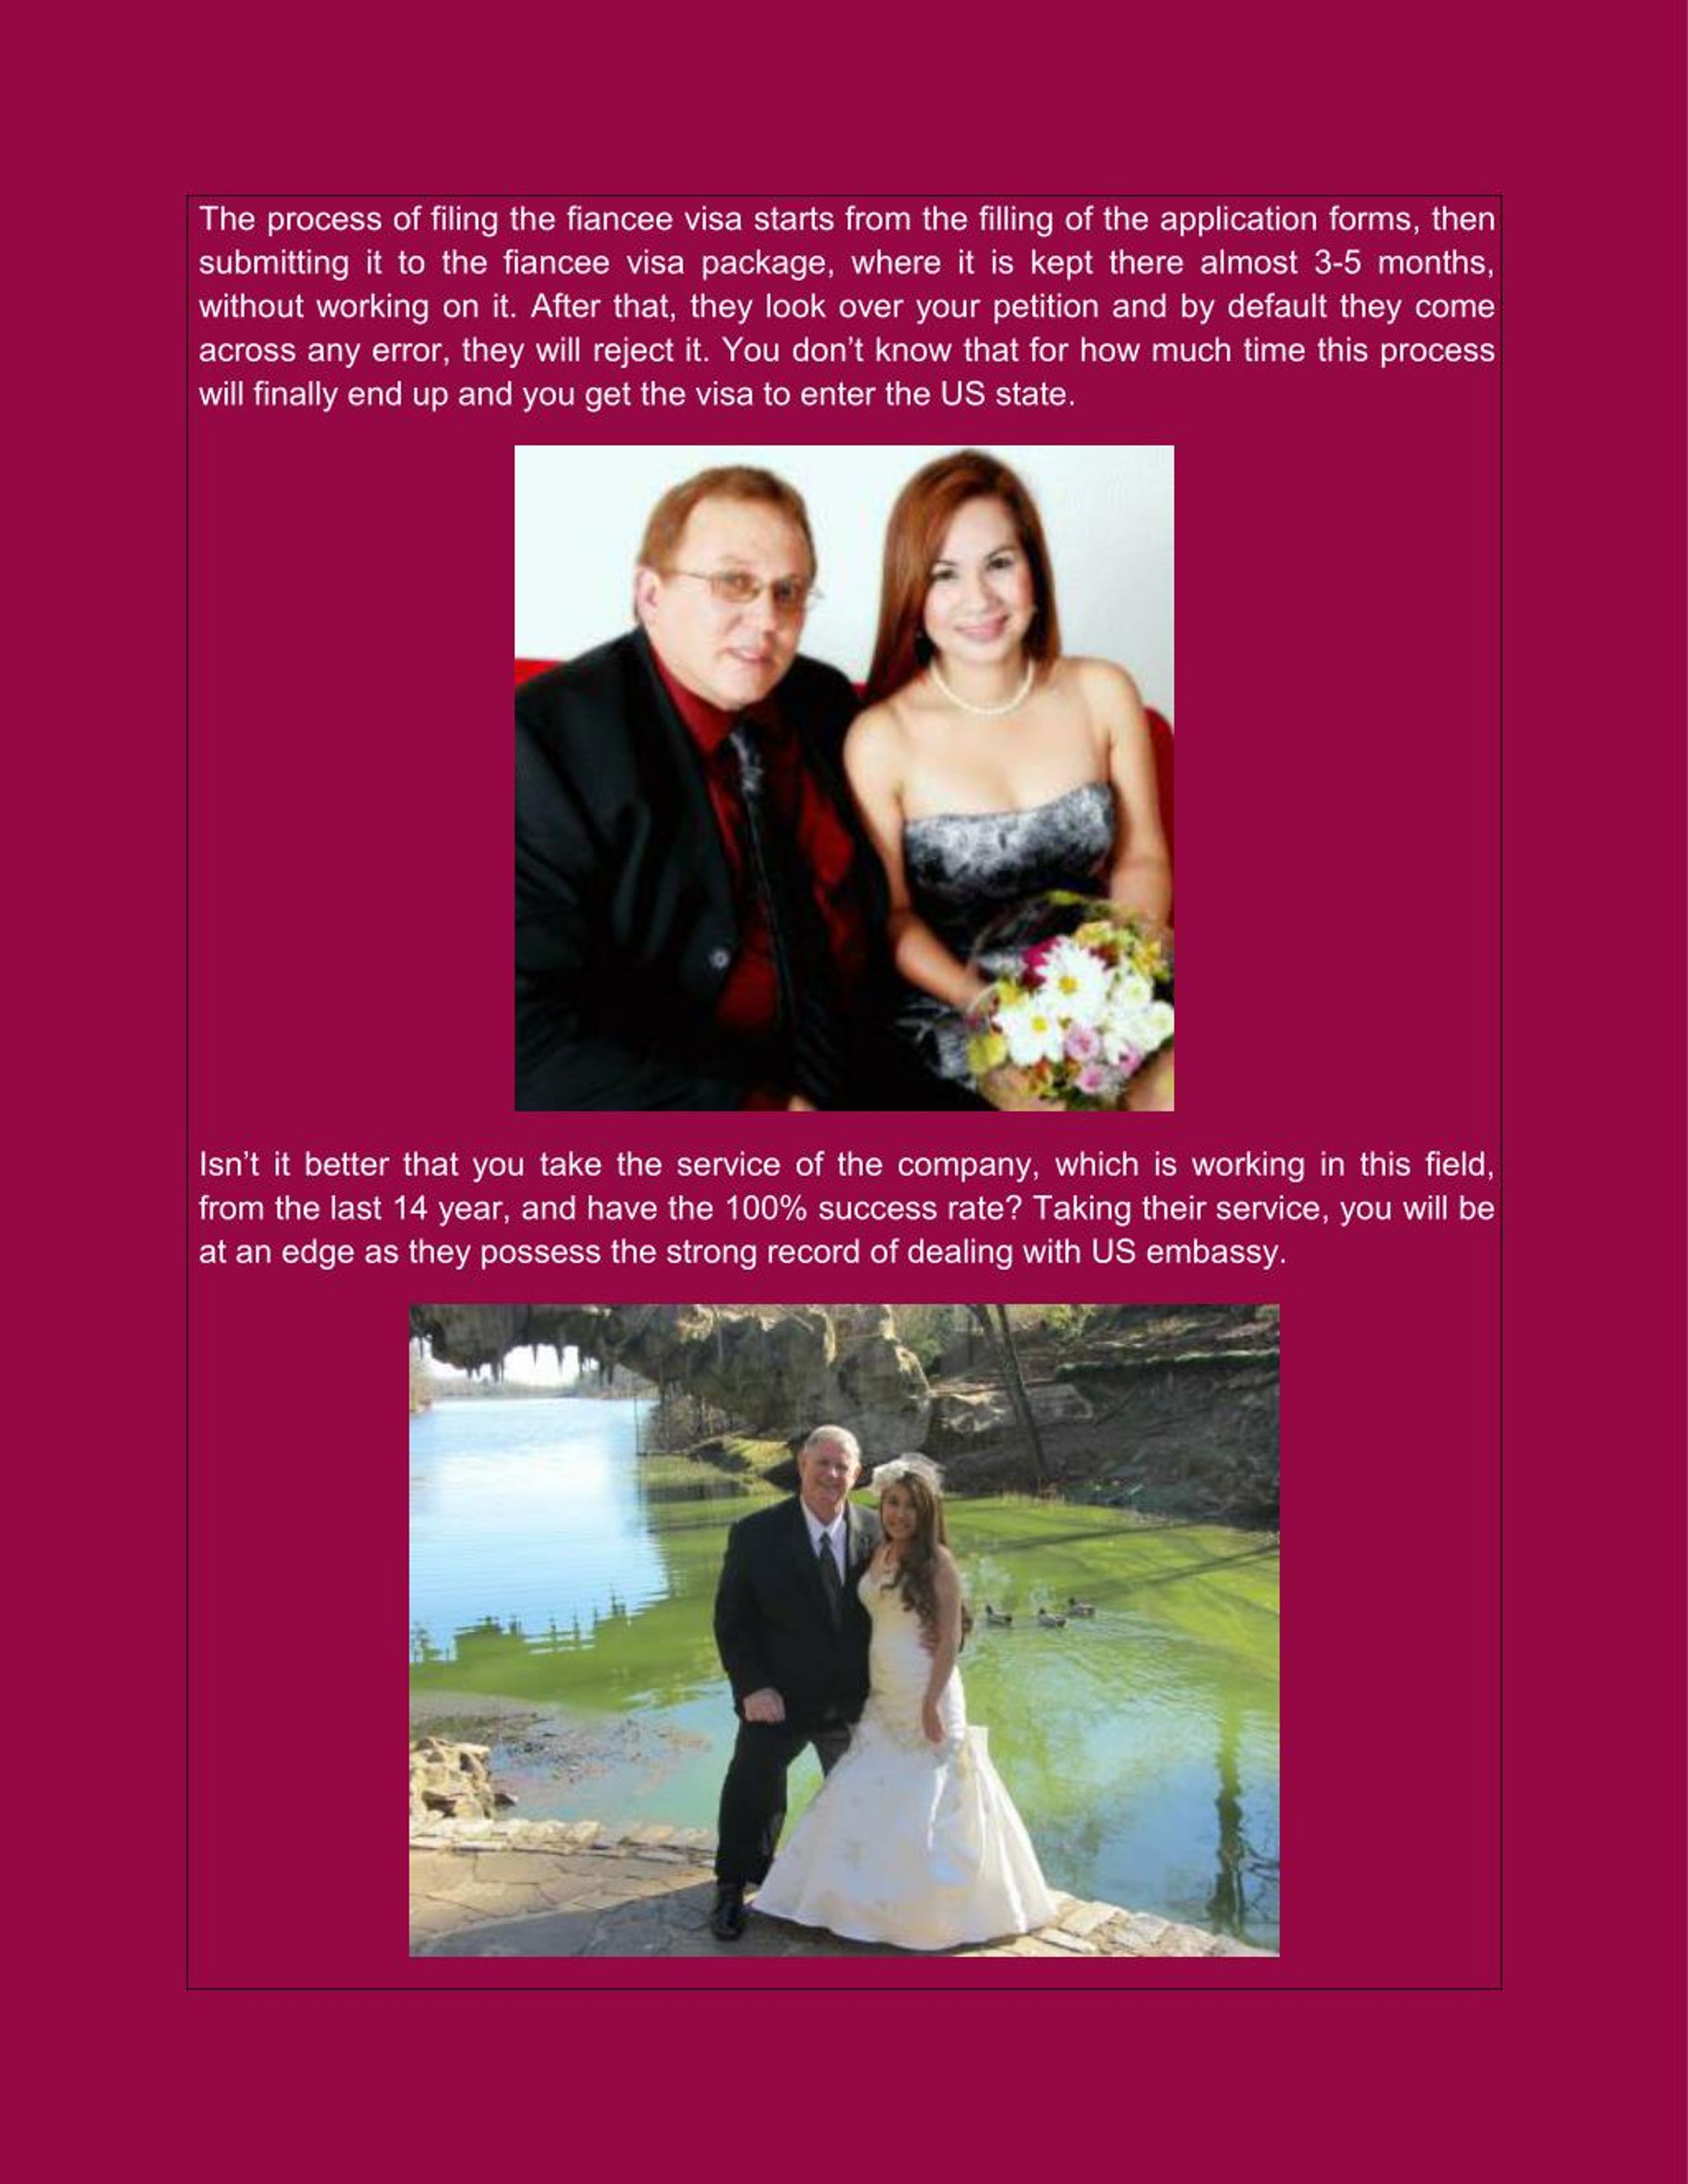 PPT - Fiance visa- a way of entrance for your fiancee in the US states ...